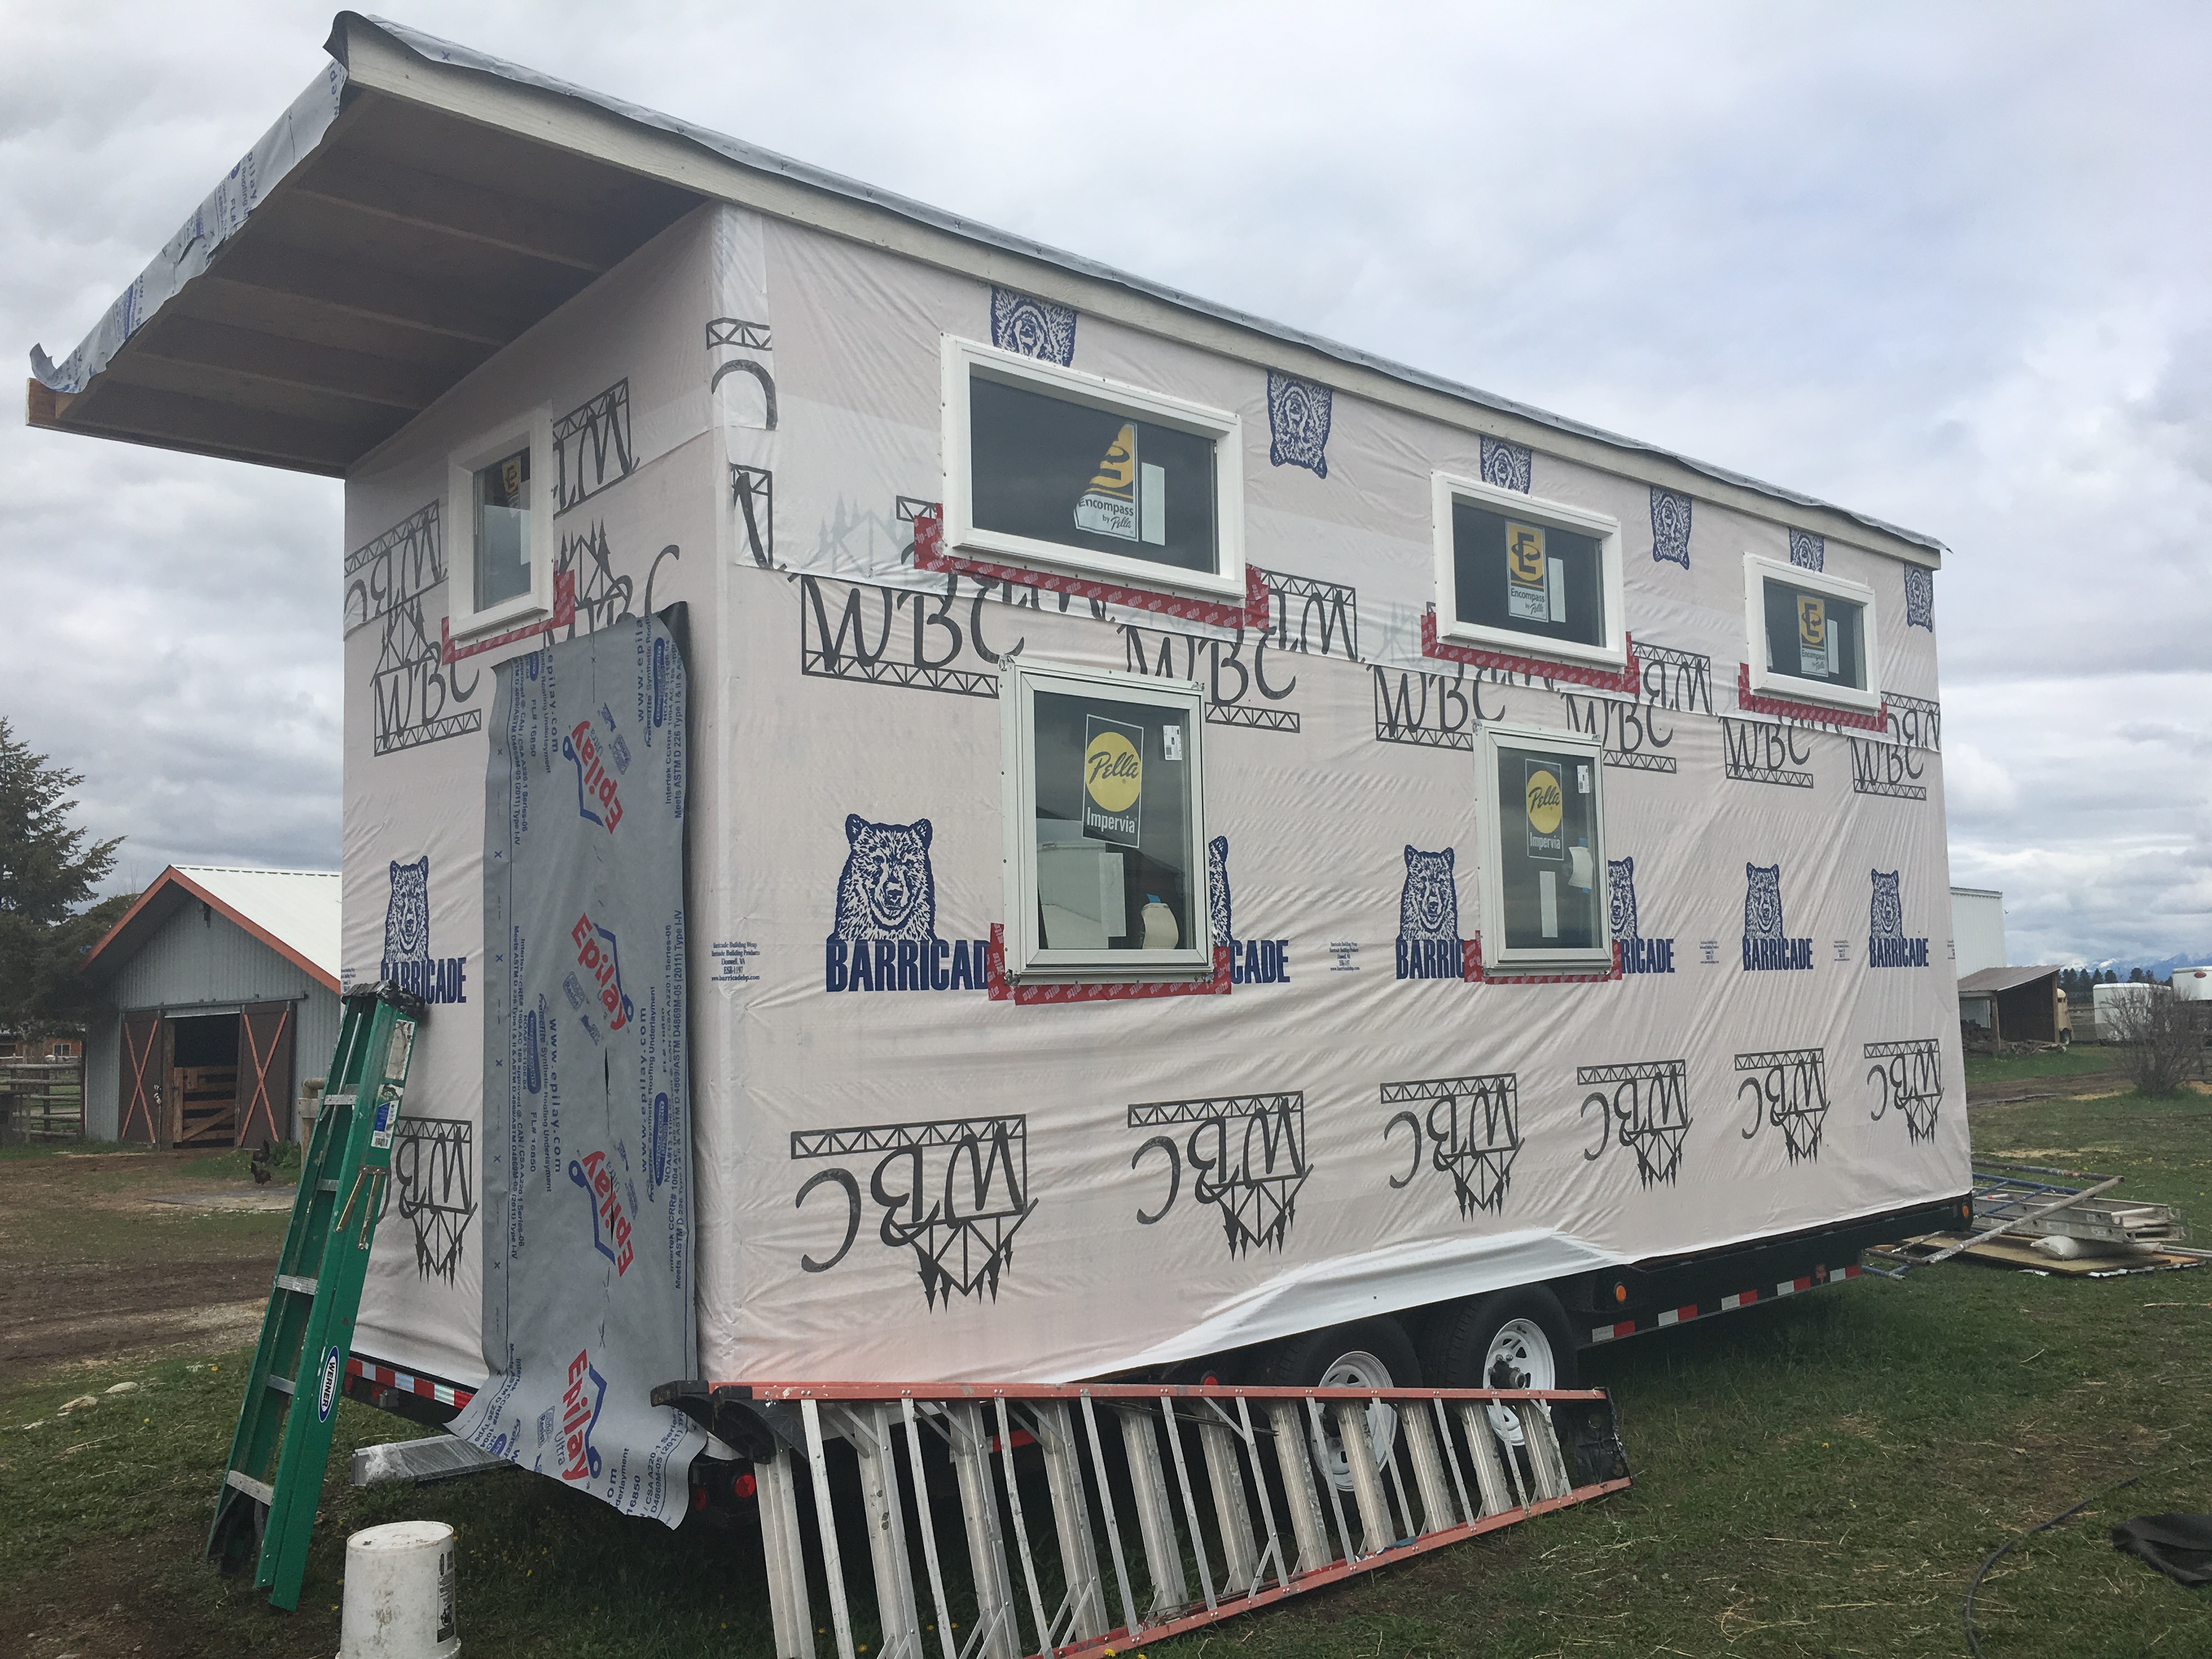 IT'S GETTING DRESSED: WINDOWS IN, HOUSE WRAP ON